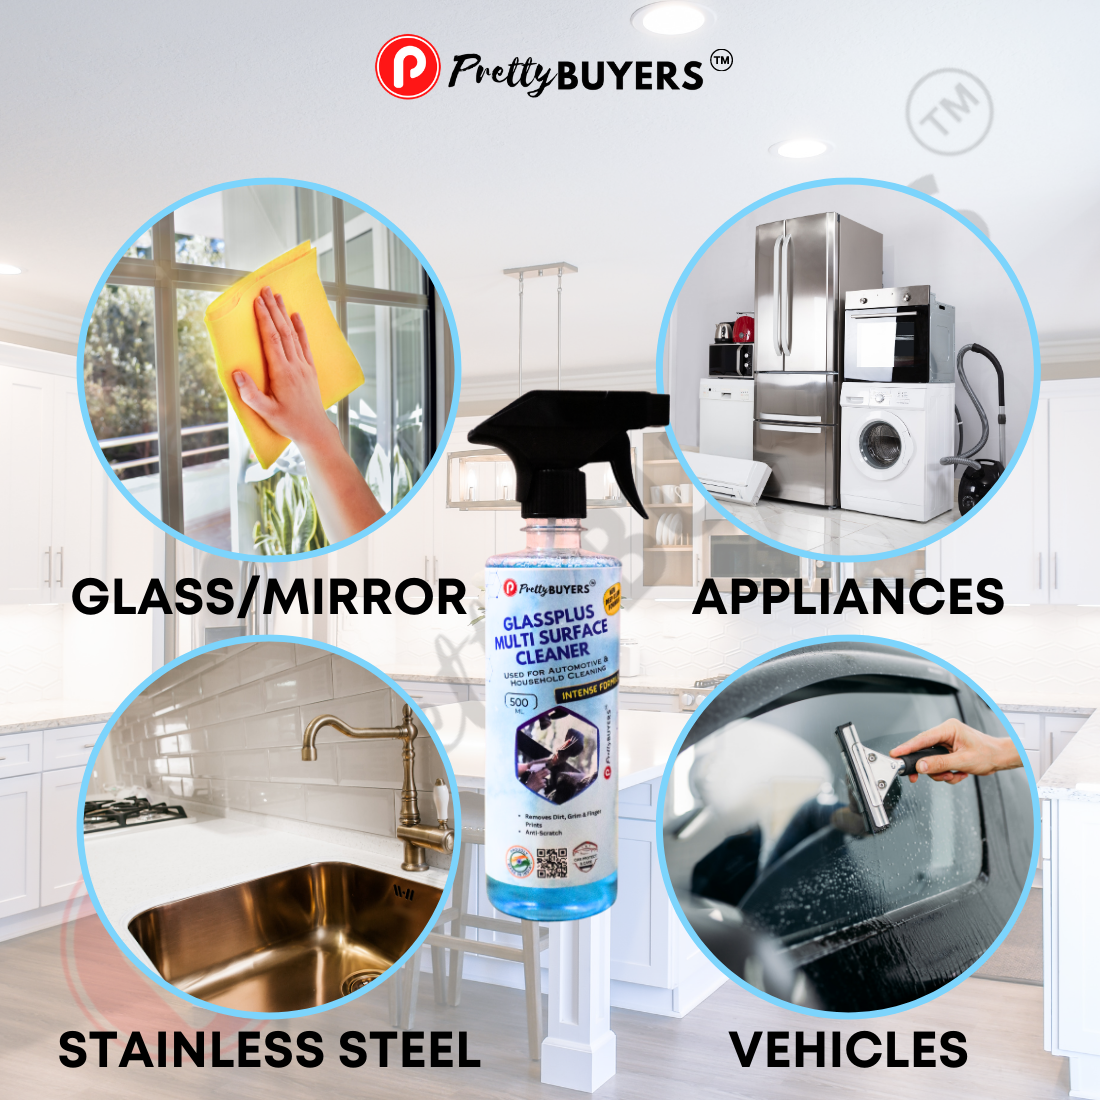 PrettyBUYERS Glass and Surface Cleaner Liquid Spray - 500 ML | All-Purpose Glass Cleaner for Car, Kitchen, and Home Surfaces | Multi-Surface Cleaner